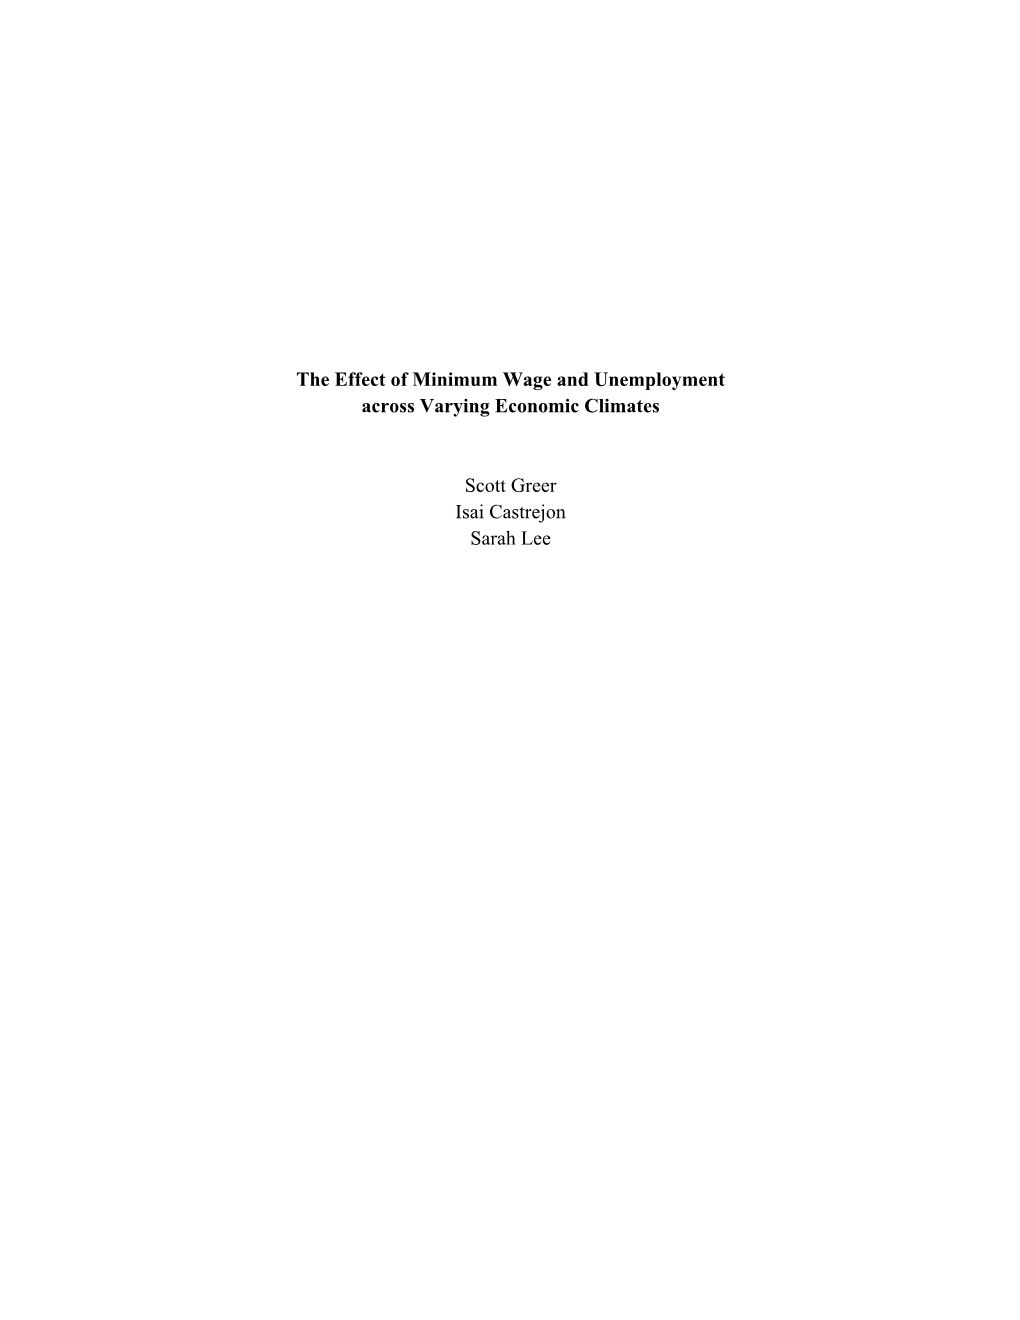 The Effect of Minimum Wage and Unemployment Across Varying Economic Climates